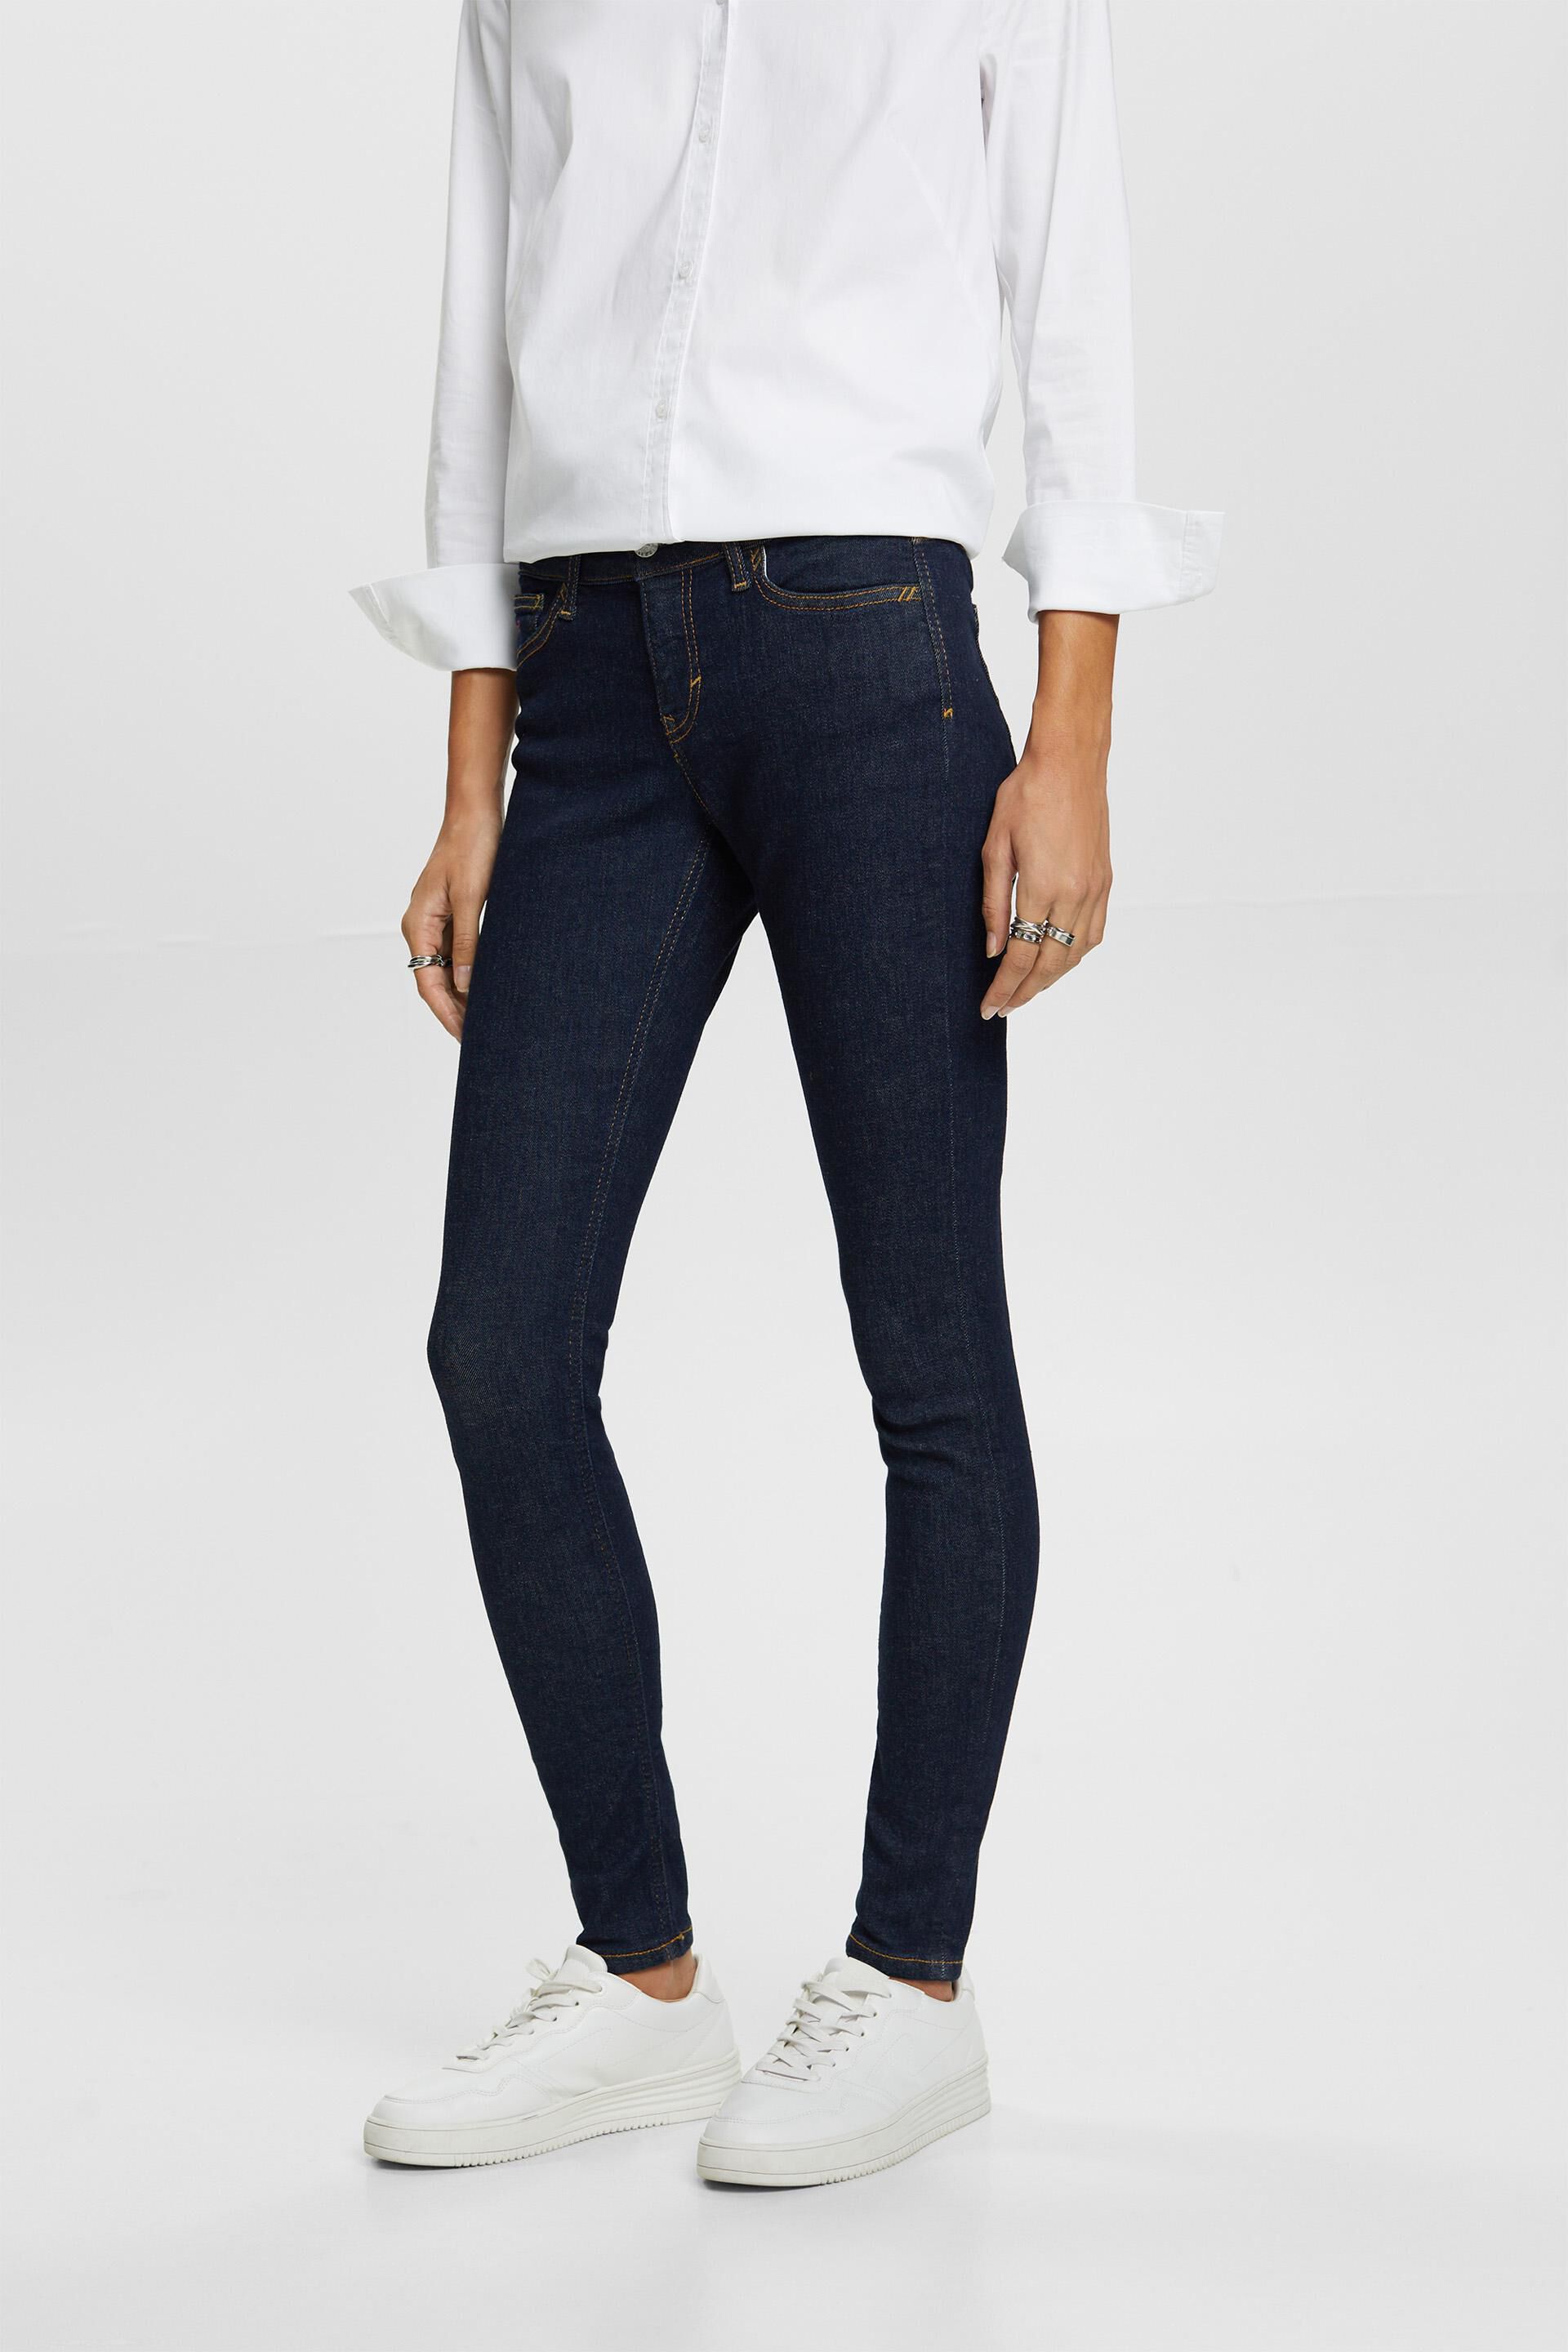 Esprit Damen Recycled: mid-rise skinny jeans